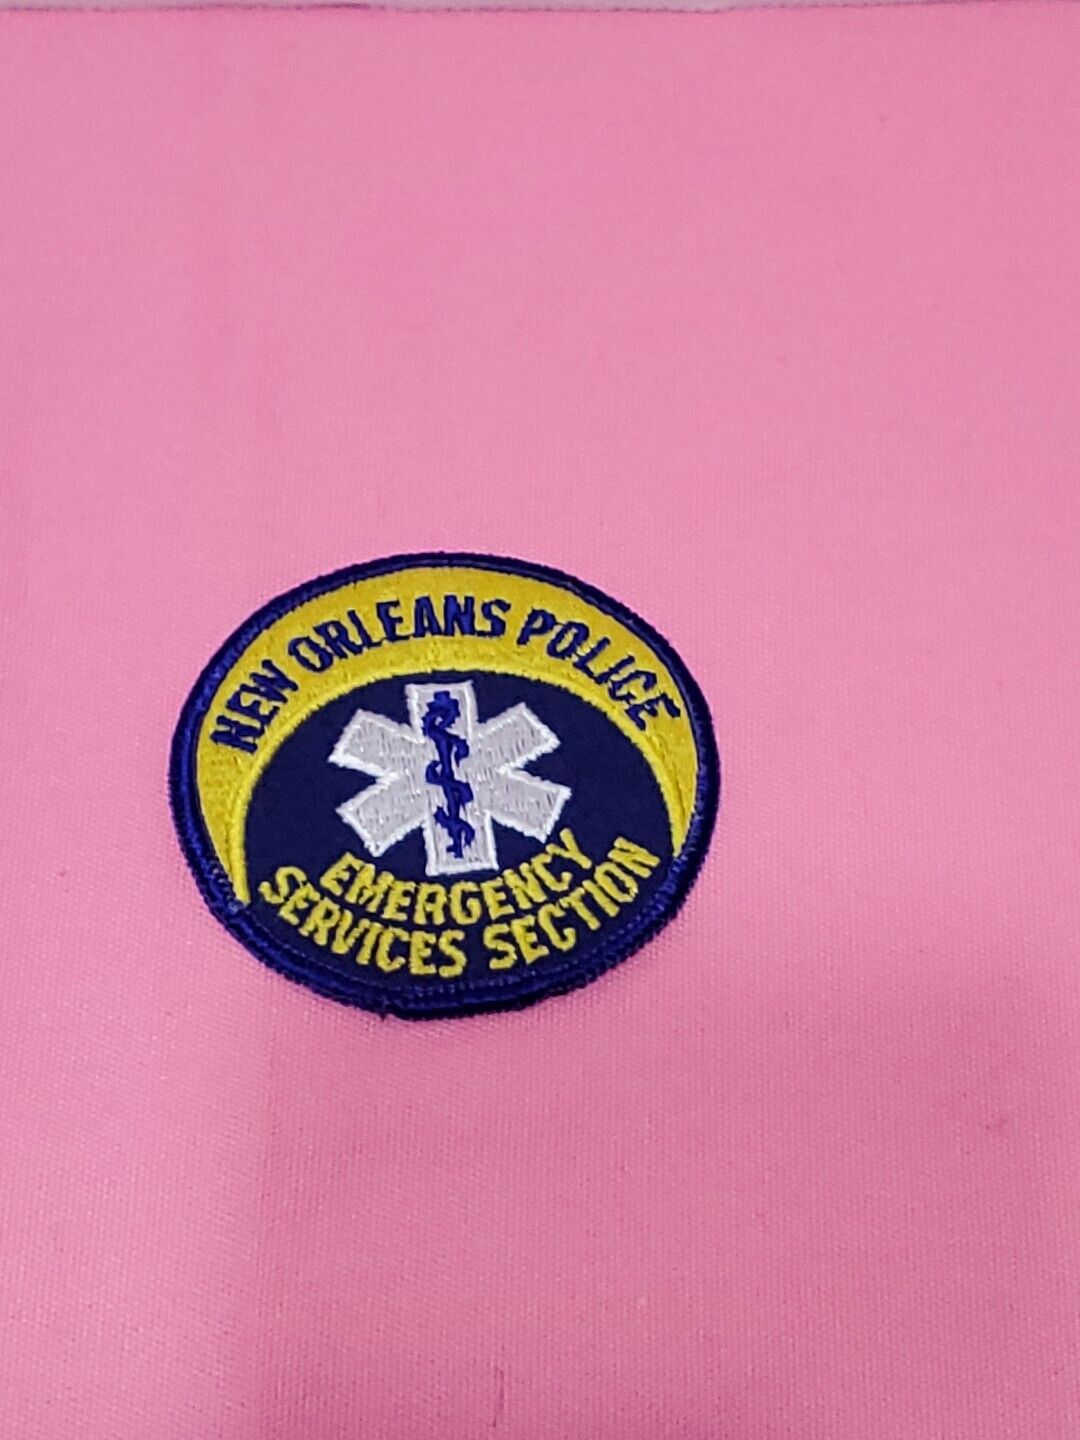 Vintage New Orleans Police Emergency Services Section Patches